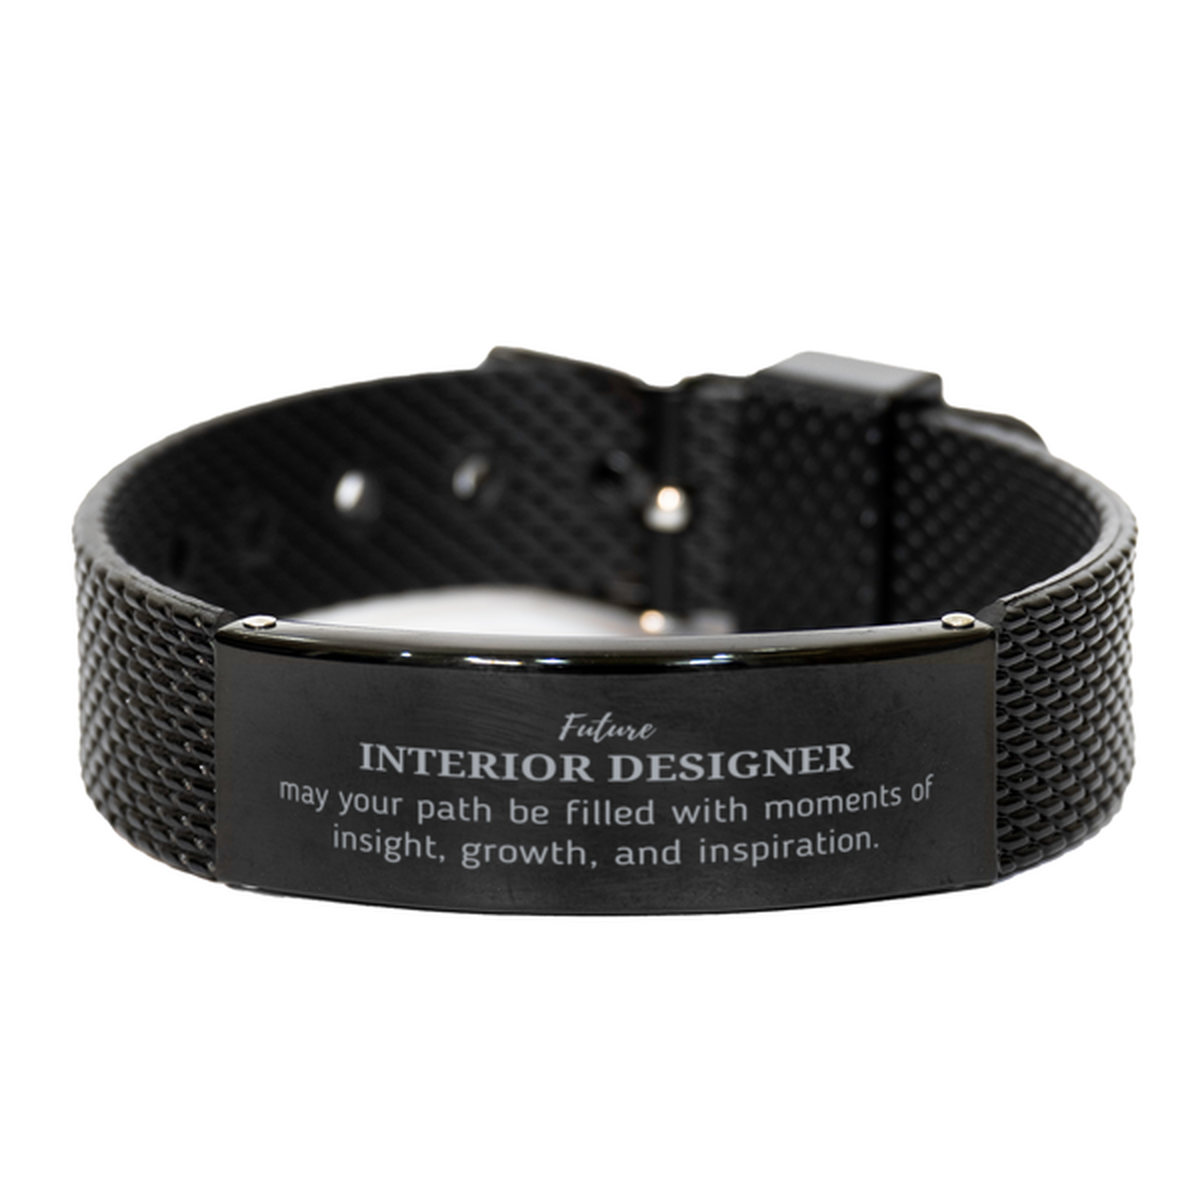 Future Interior Designer Gifts, May your path be filled with moments of insight, Graduation Gifts for New Interior Designer, Christmas Unique Black Shark Mesh Bracelet For Men, Women, Friends